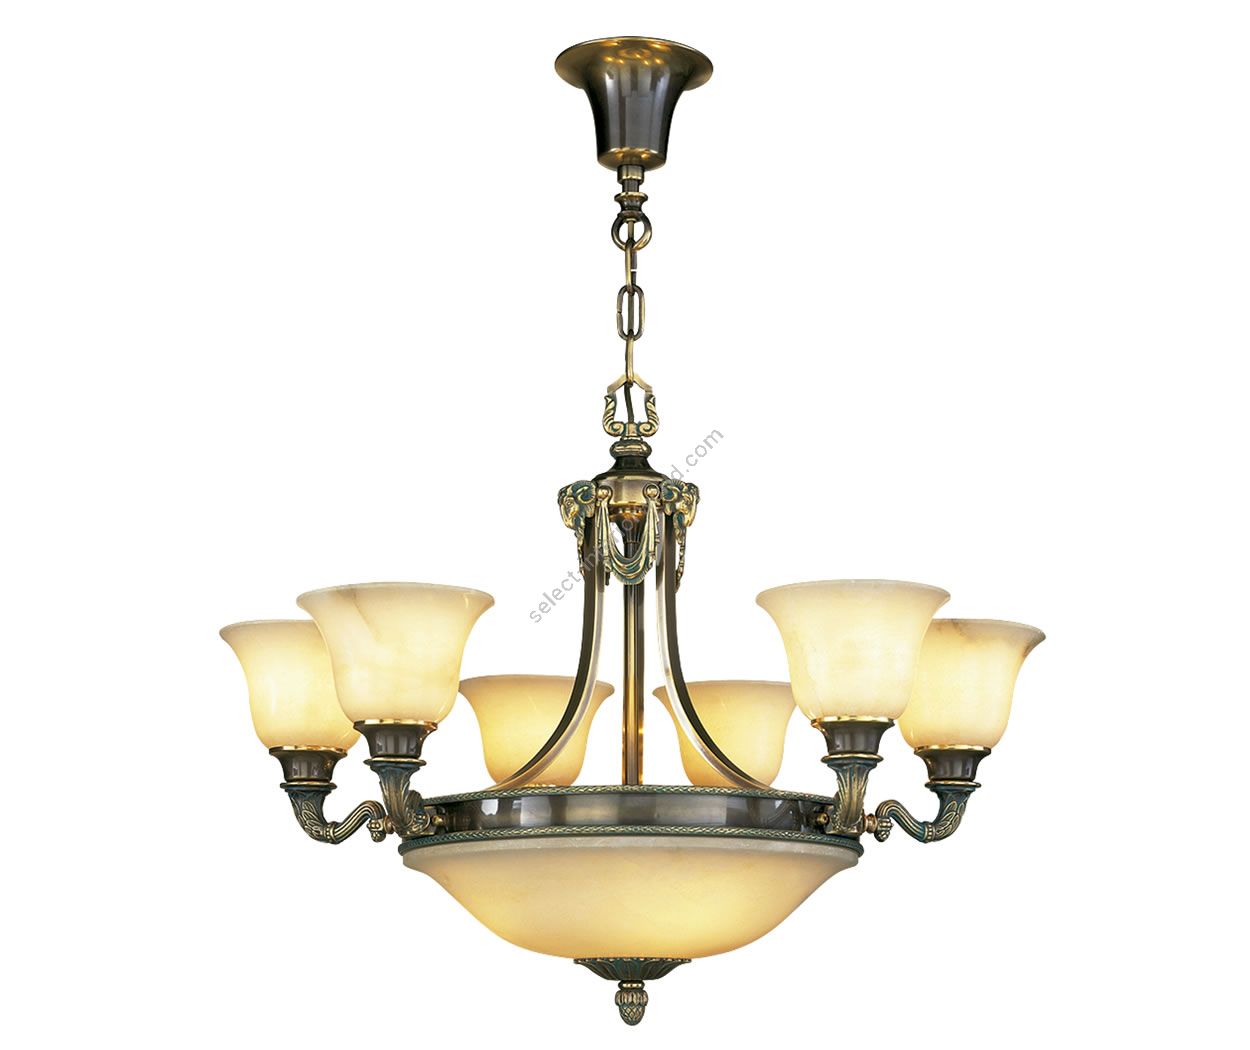 Mariner / Decorative Bronze Chandelier, With Alabaster Dome and Shades / 18696